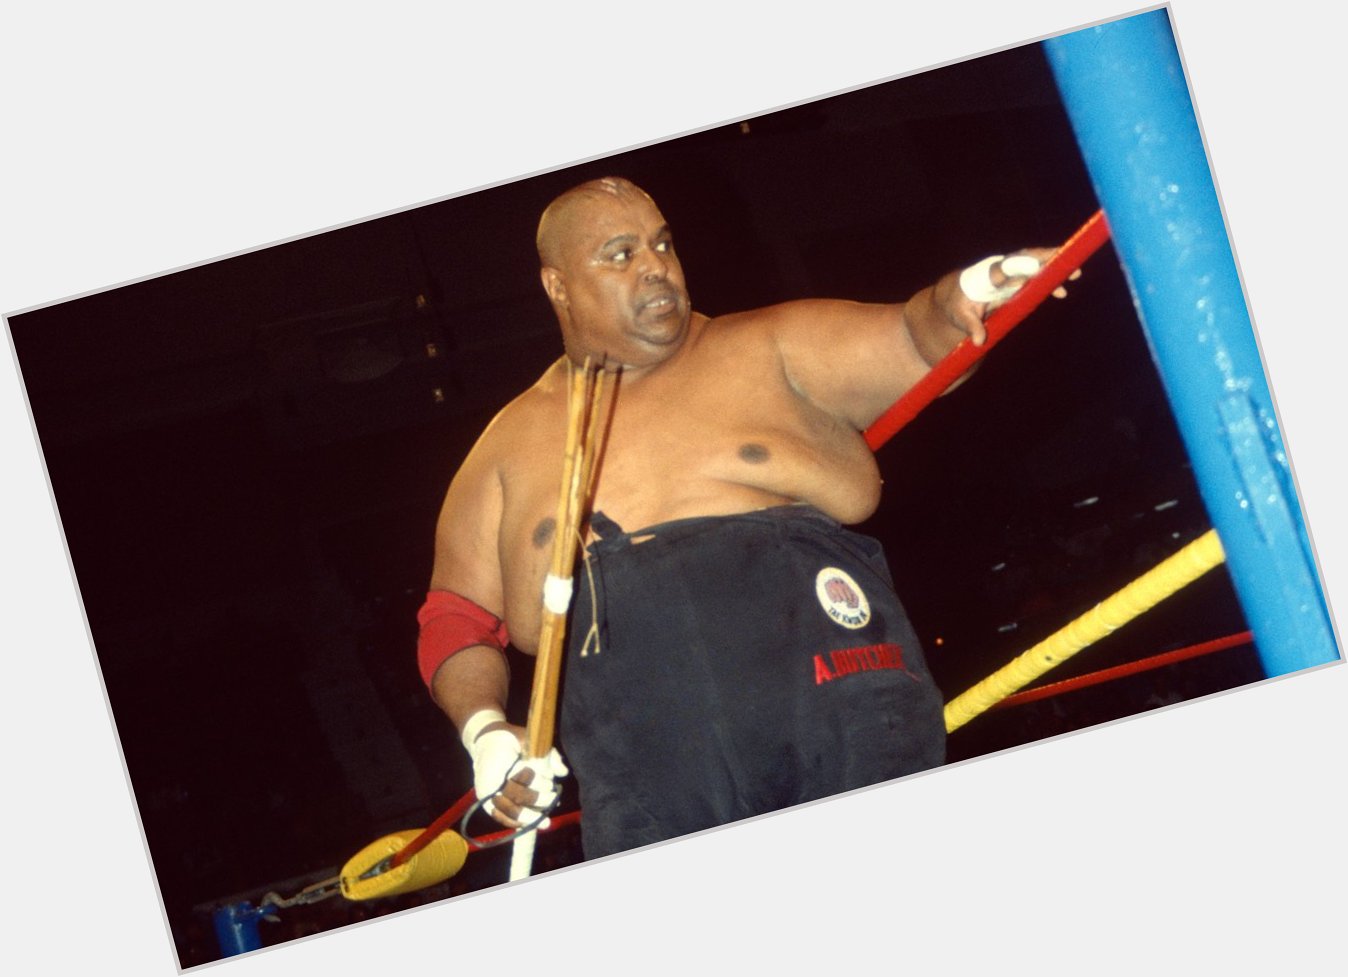 Happy birthday to Canadian wrestling icon and WWE Hall of Famer Abdullah the Butcher! 